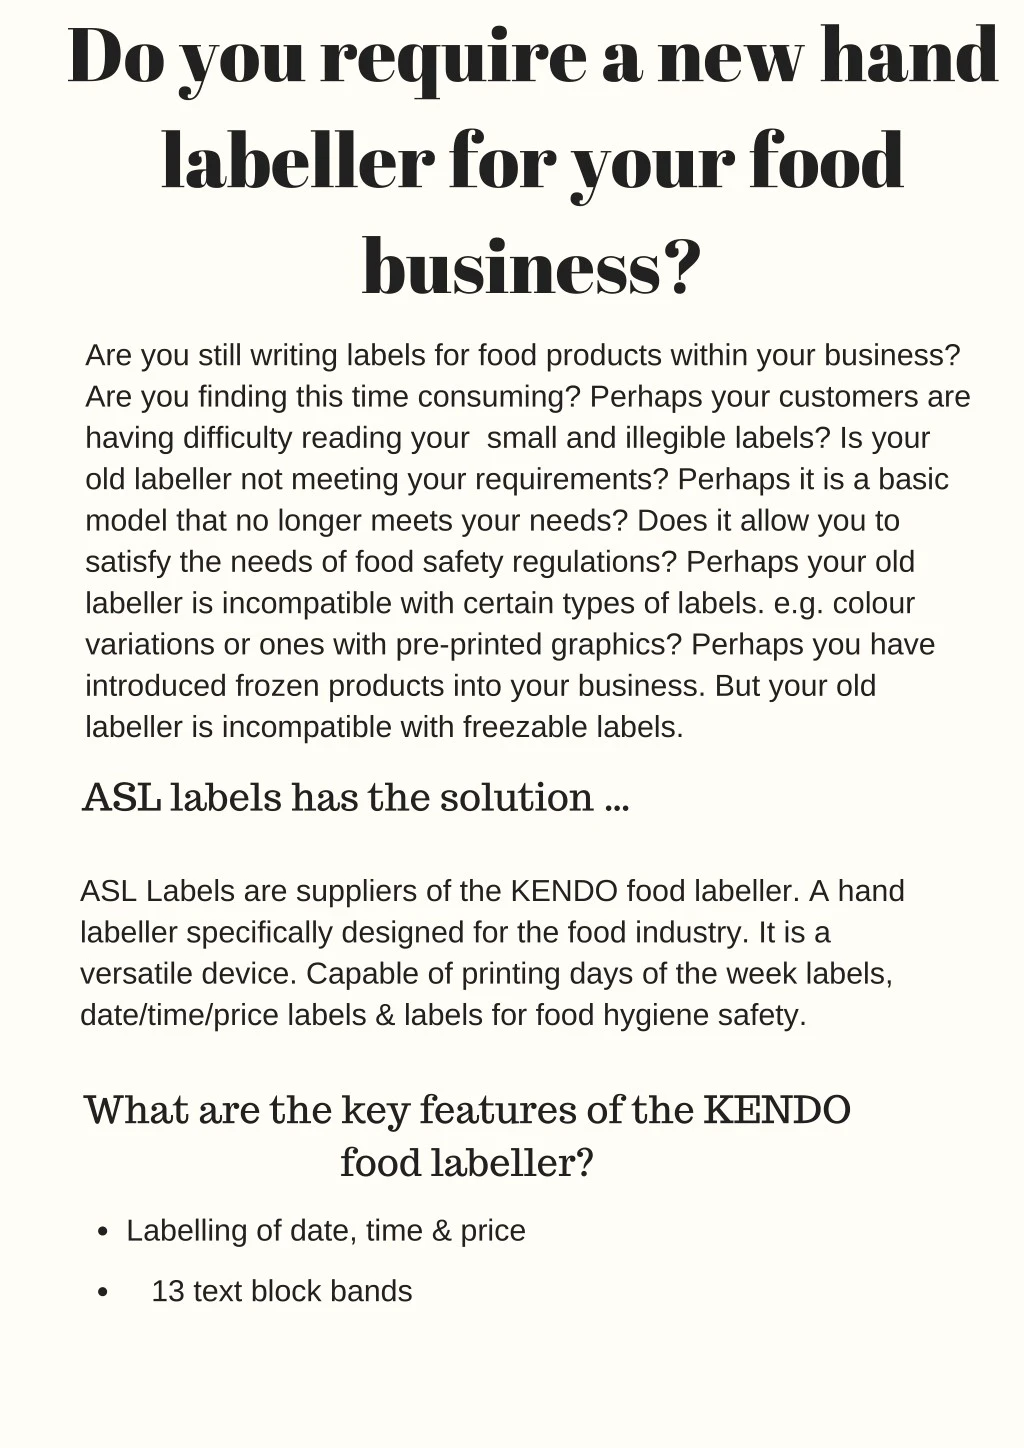 do you require a new hand labeller for your food